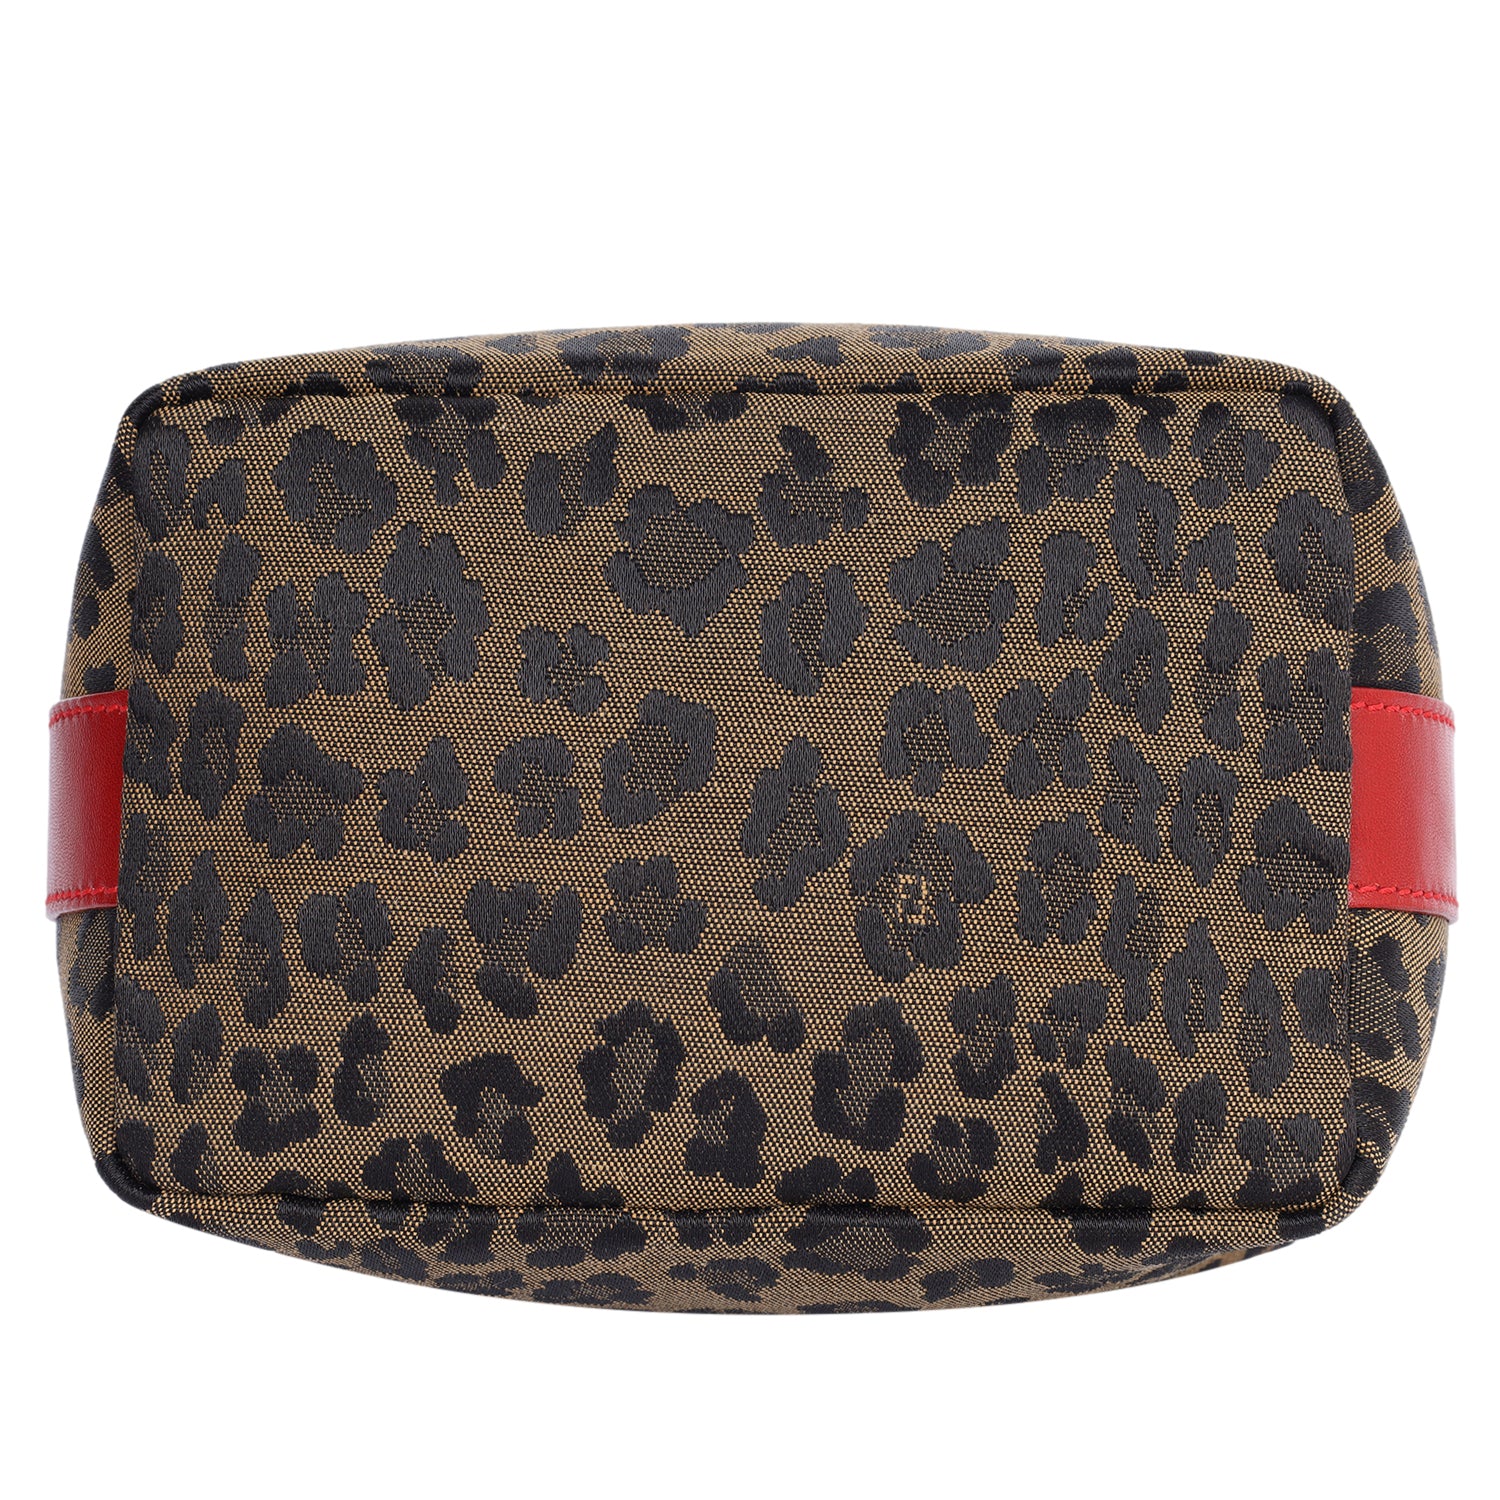 FF Leopard Cosmetic Bag (Authentic Pre-Owned) – The Lady Bag